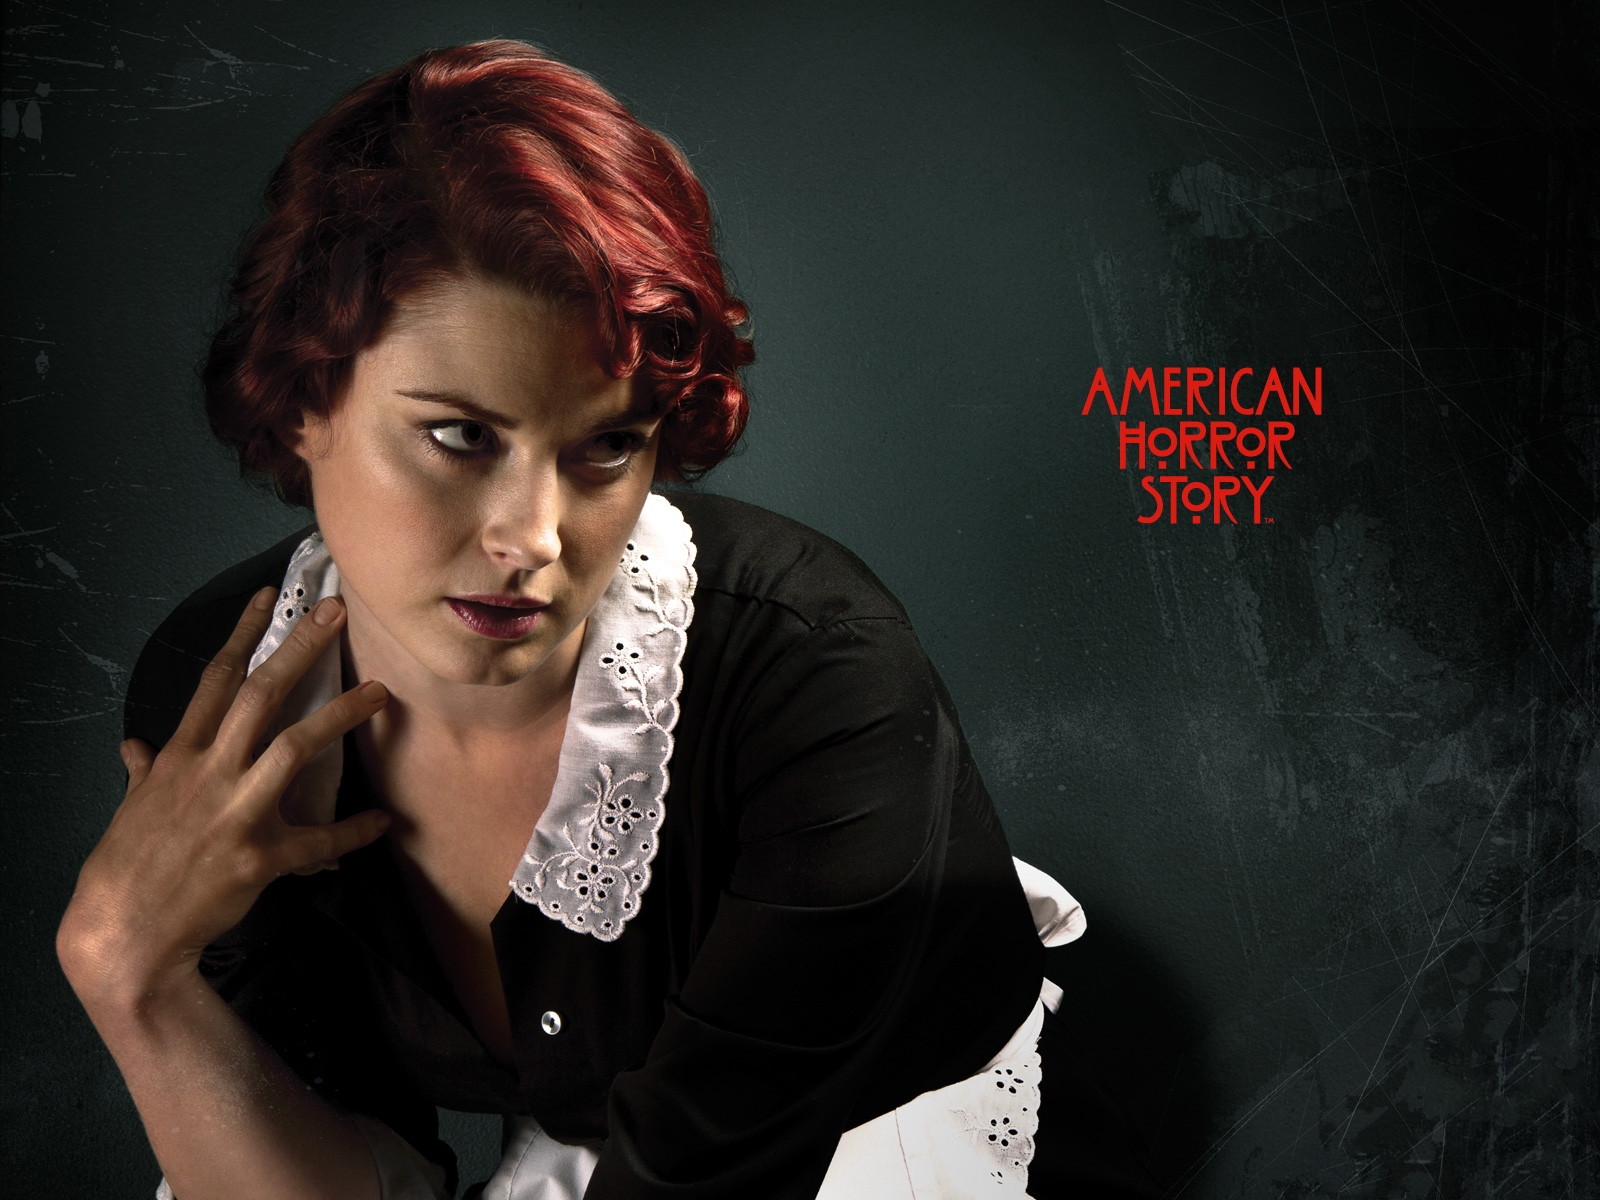 American-Horror-Story-four-season-wovow.org-02